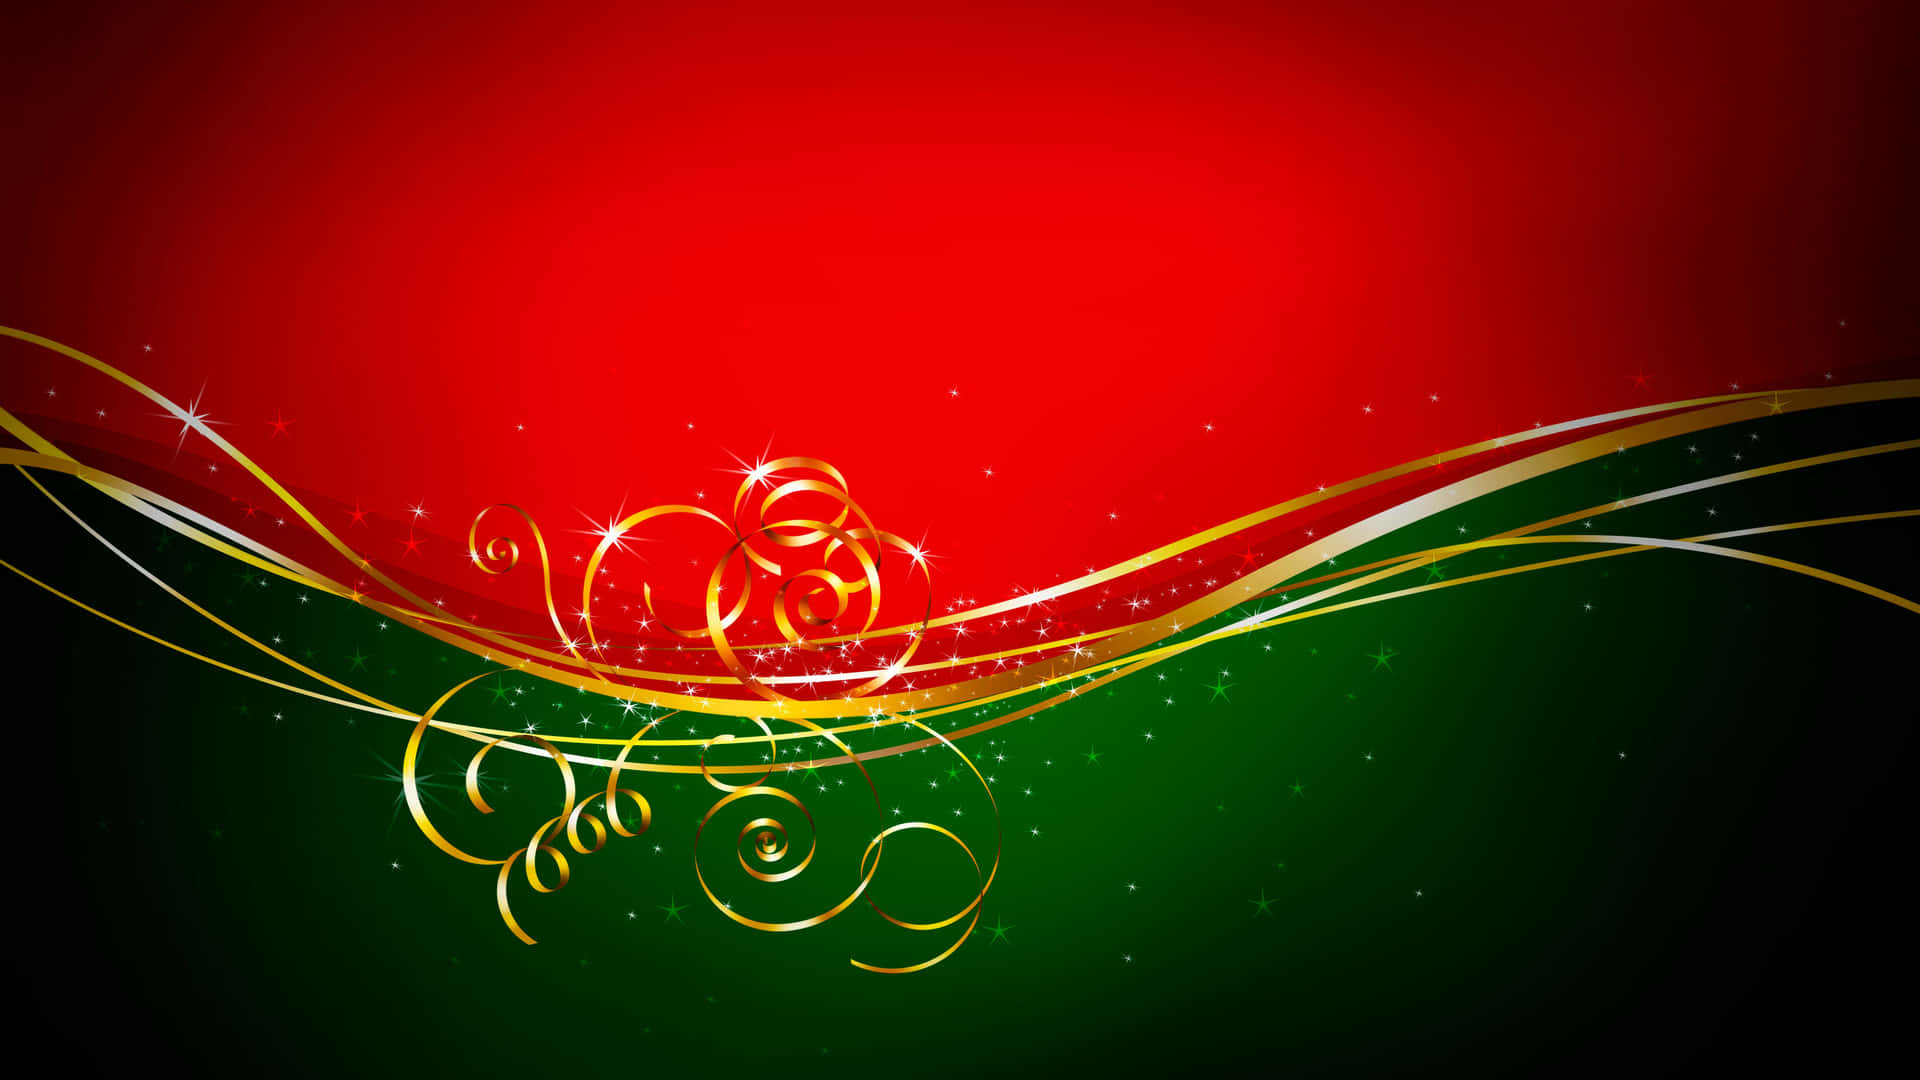 Download Red And Green Christmas Wallpaper 